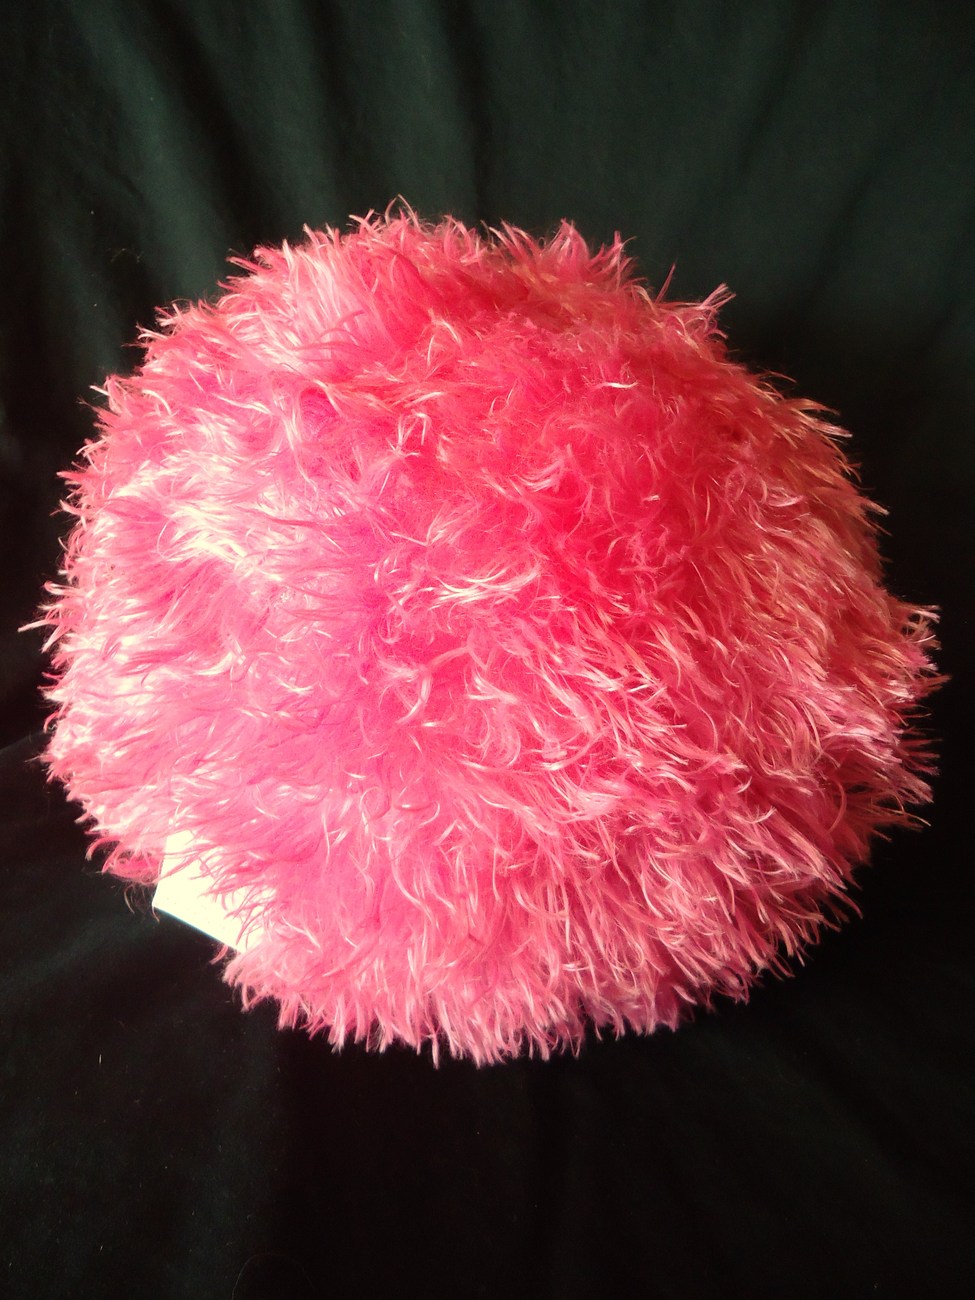 Hobby Lobby Pink Fuzzy Monster Ball Pillow Plush With Sunglasses